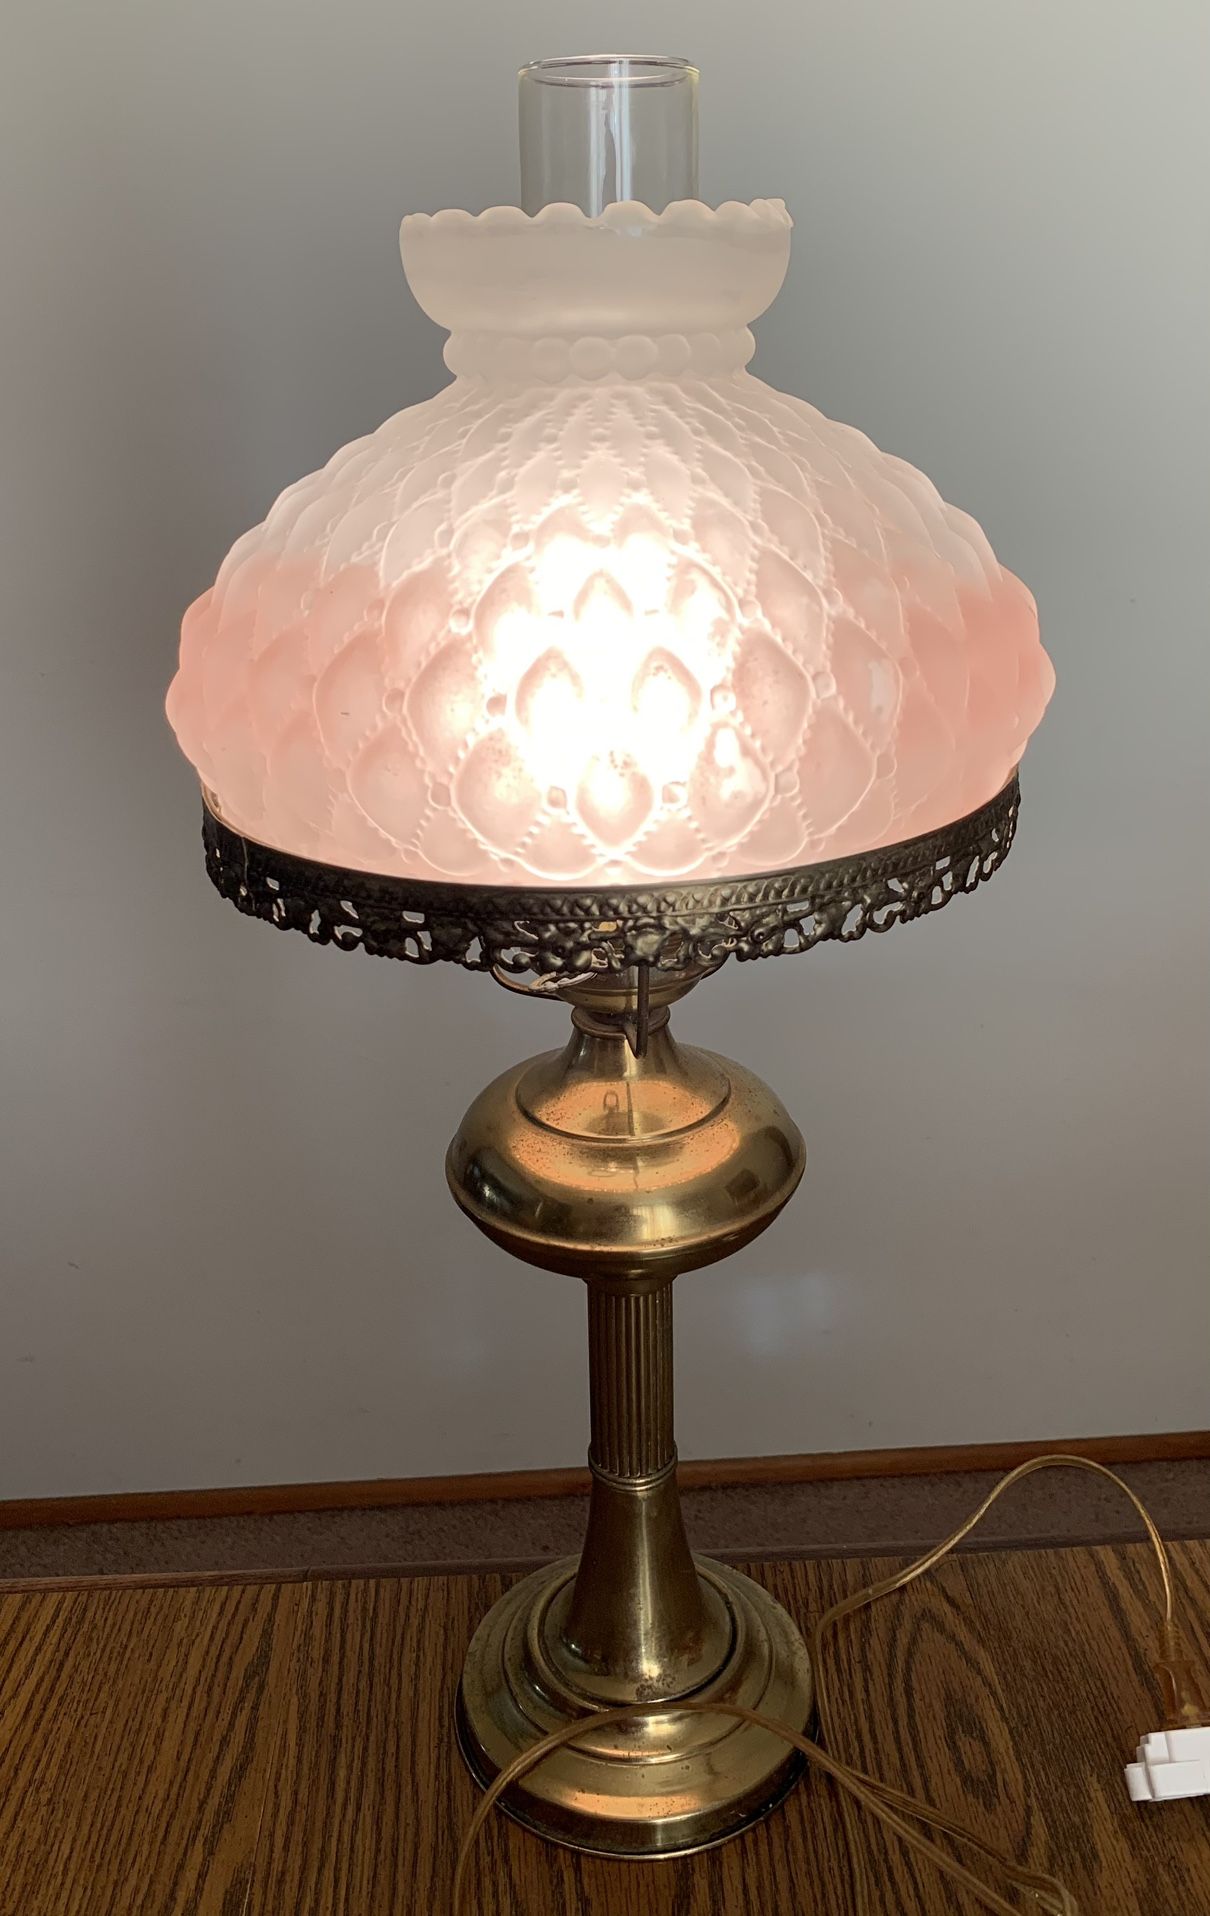 Vintage Parlor-Table Lamp Light Brass Fixture Pink Beaded/Quilted Shade